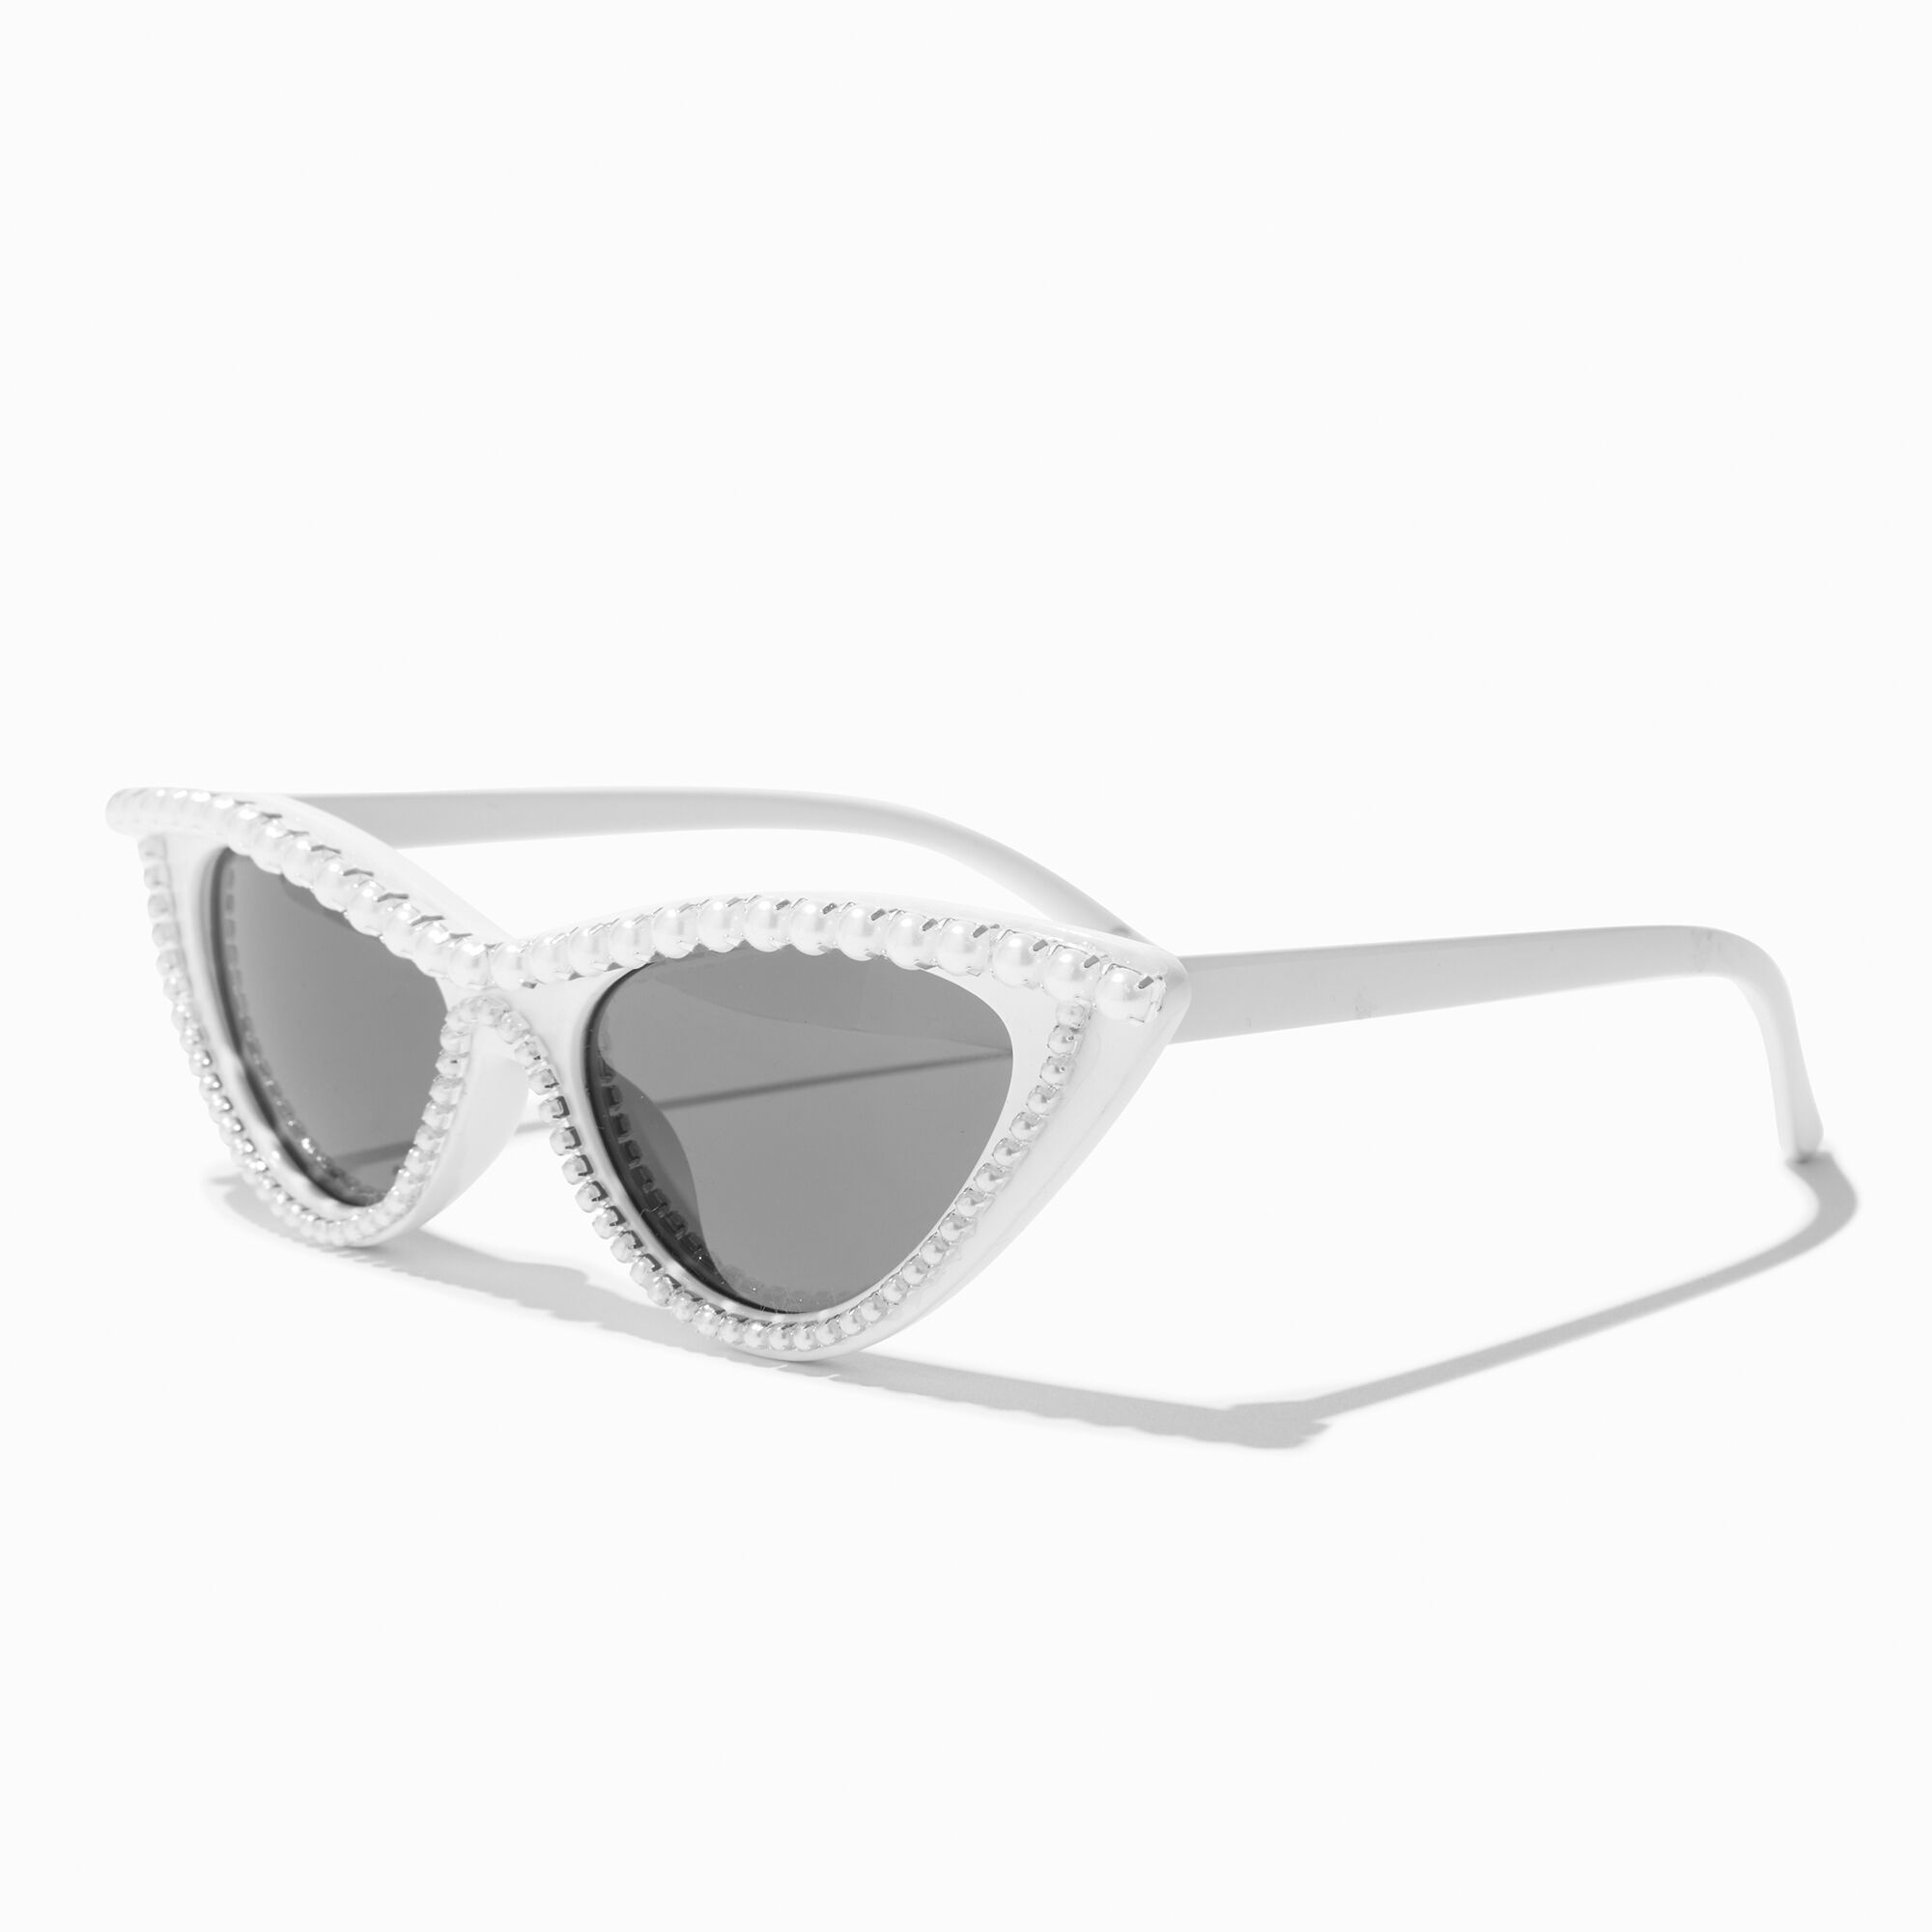 View Claires Pearl Trim Cat Eye Sunglasses information